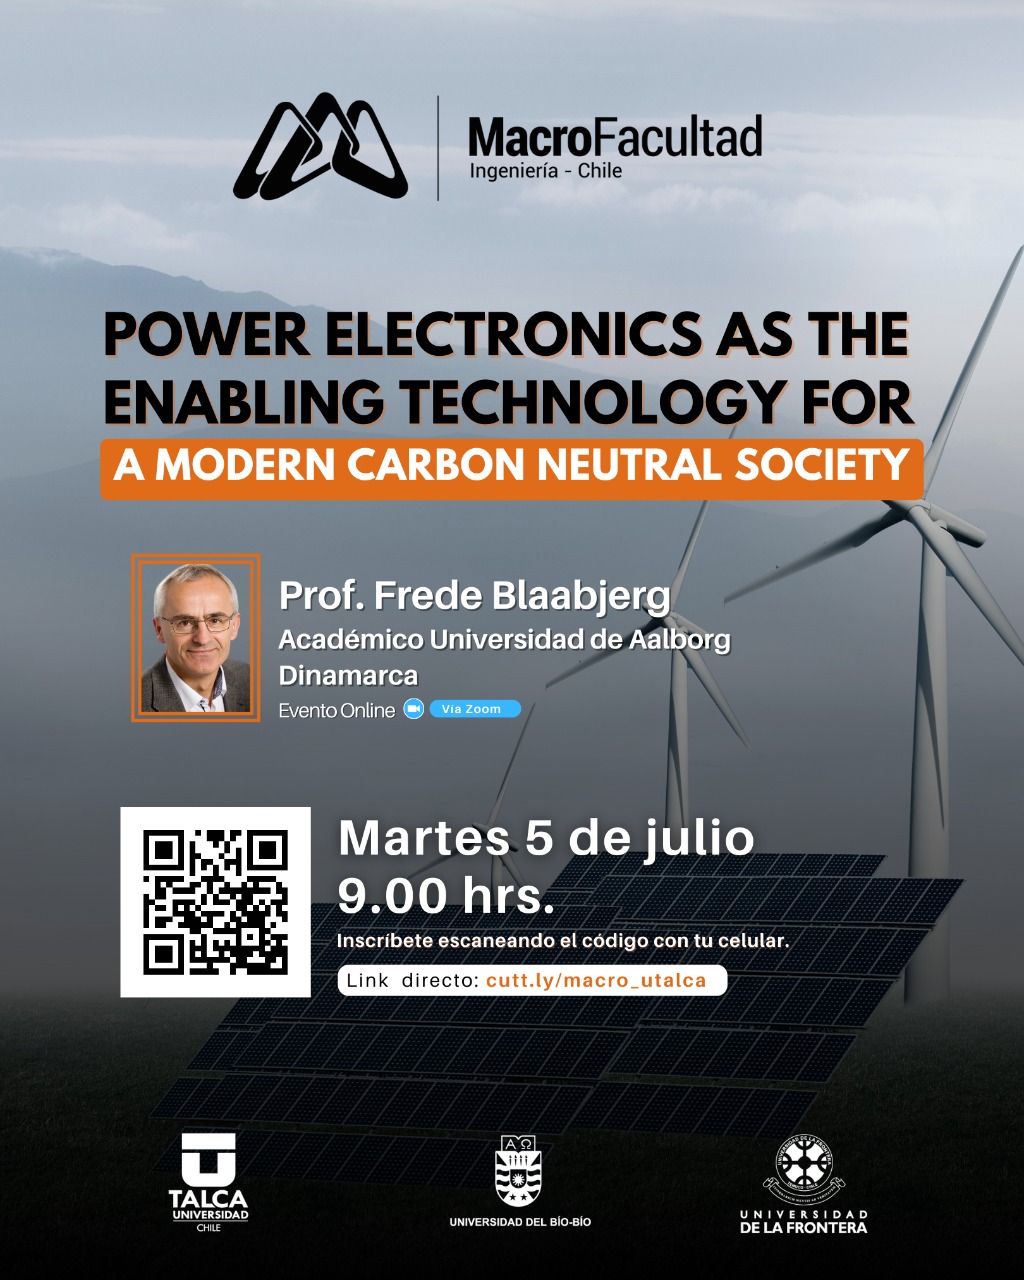 Power Electronics as the Enabling Technology for a Modern Carbon Neutral Society